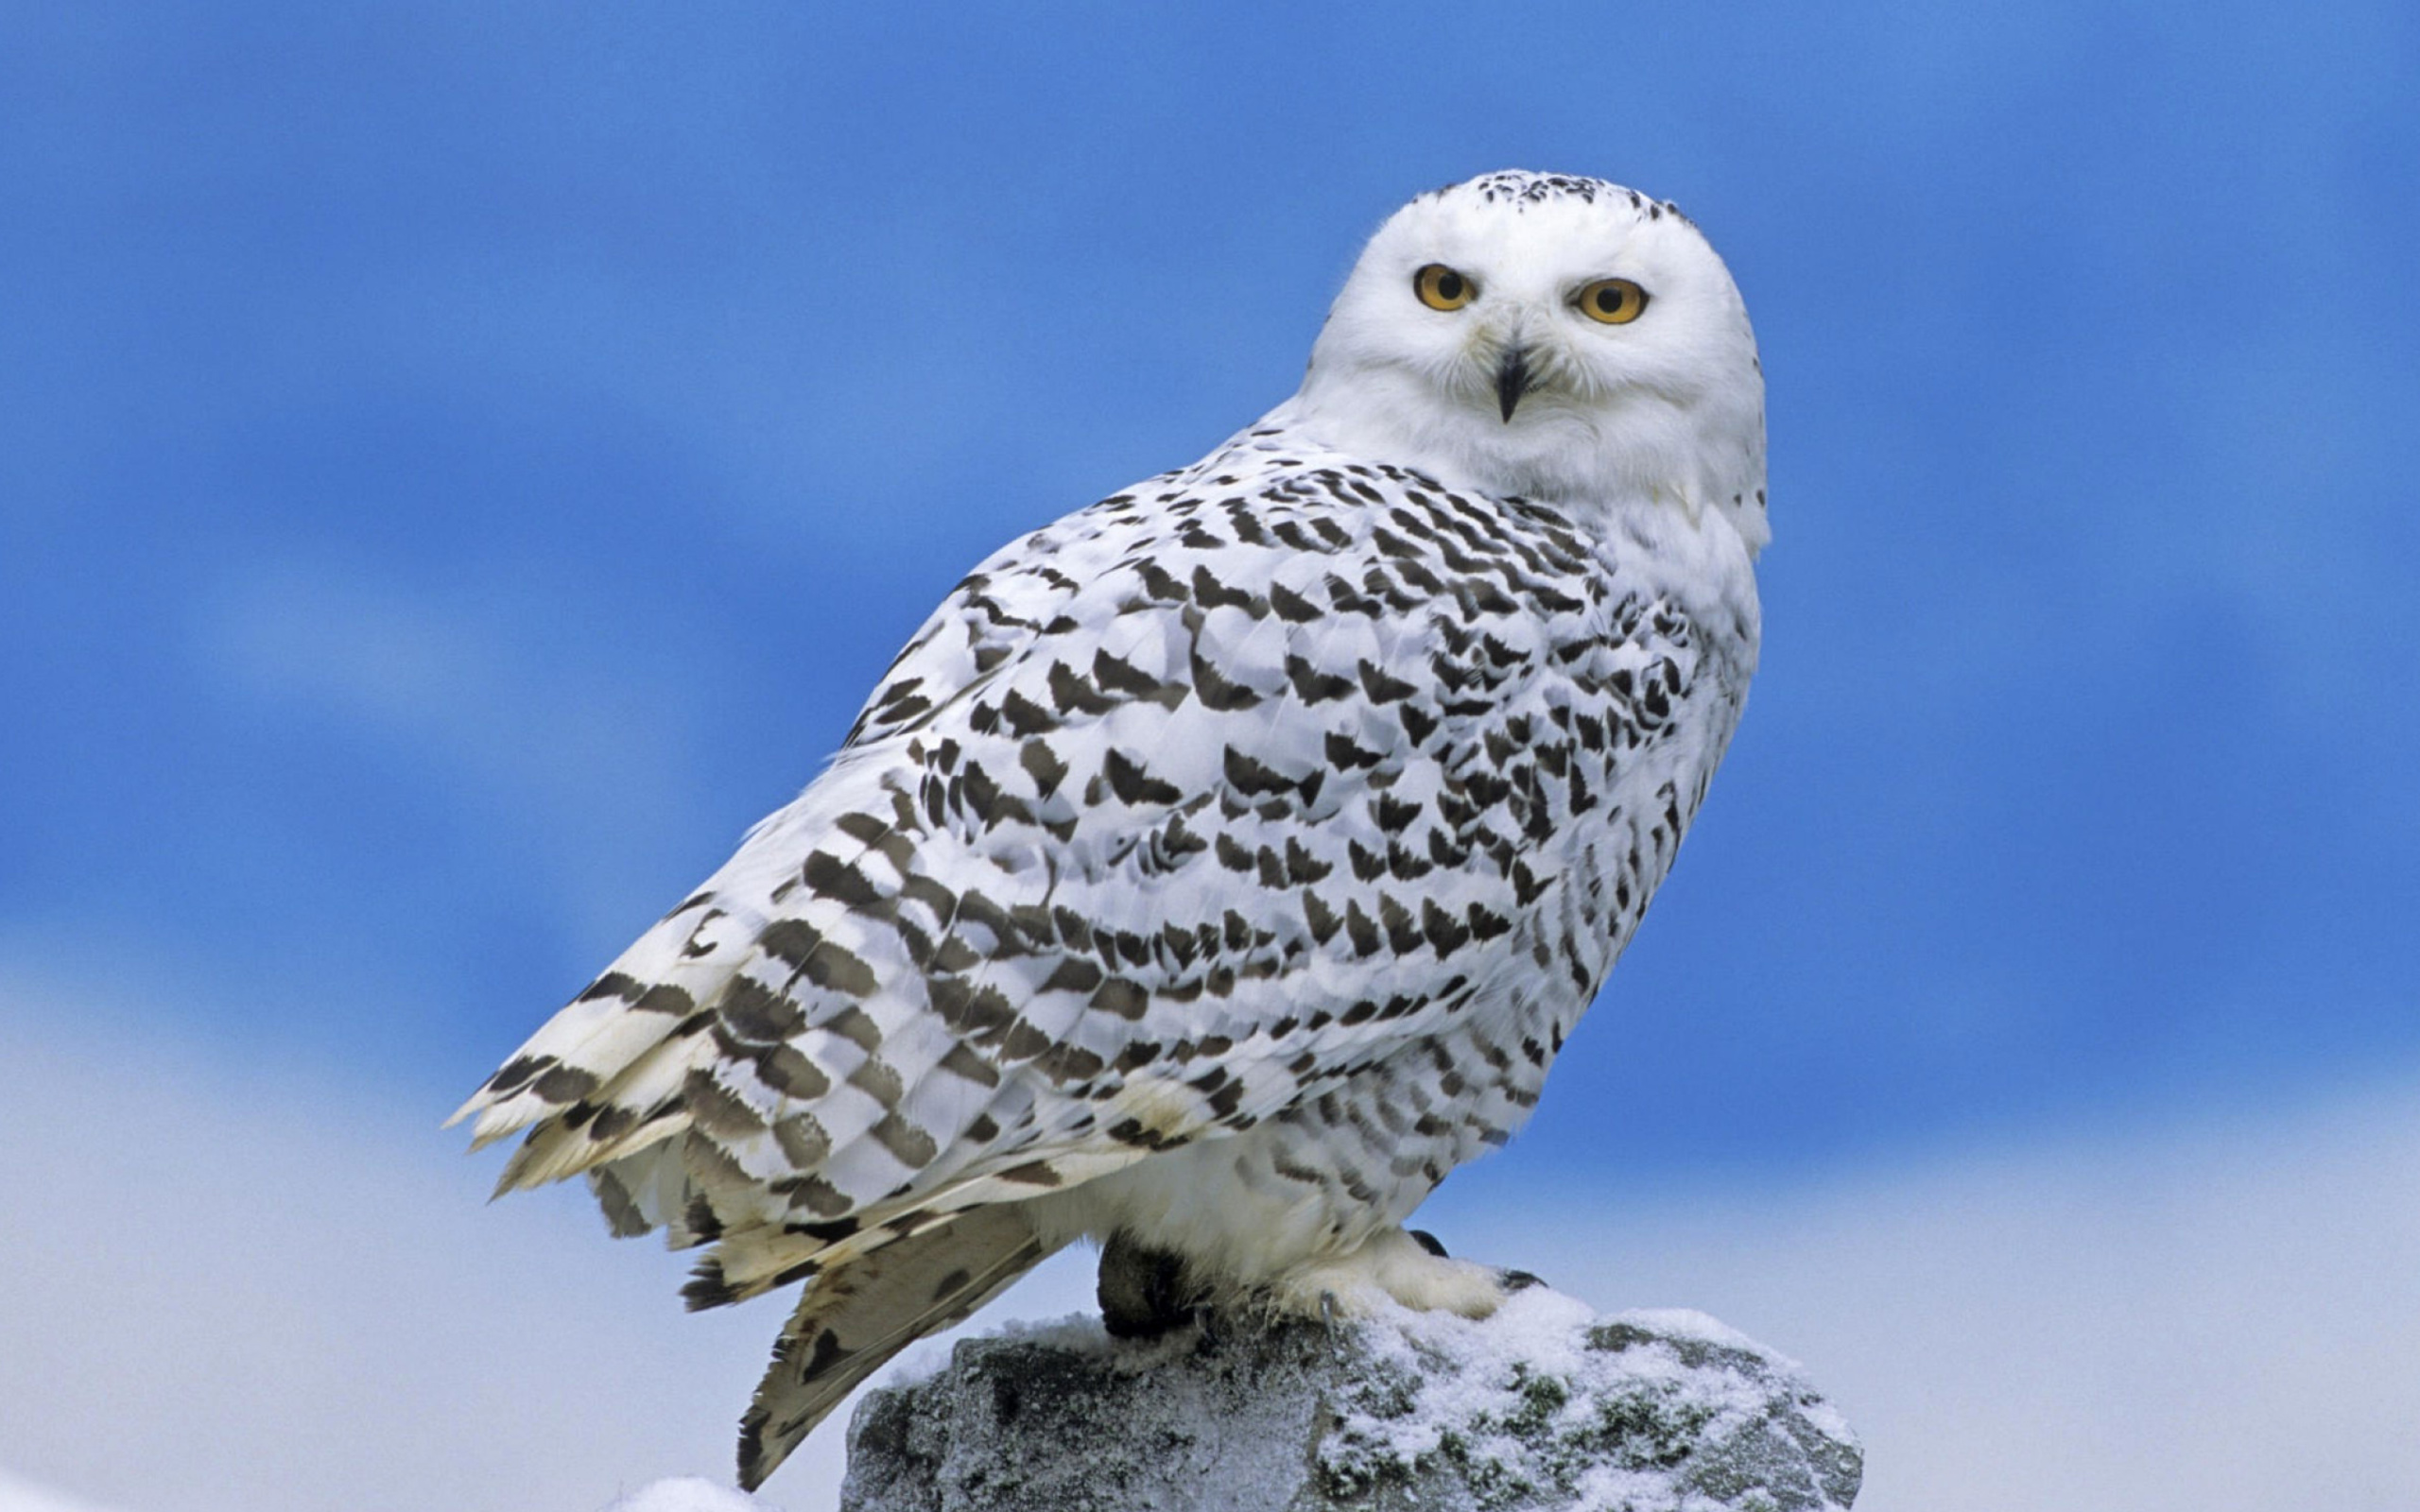 Snowy owl from Arctic wallpaper 2560x1600